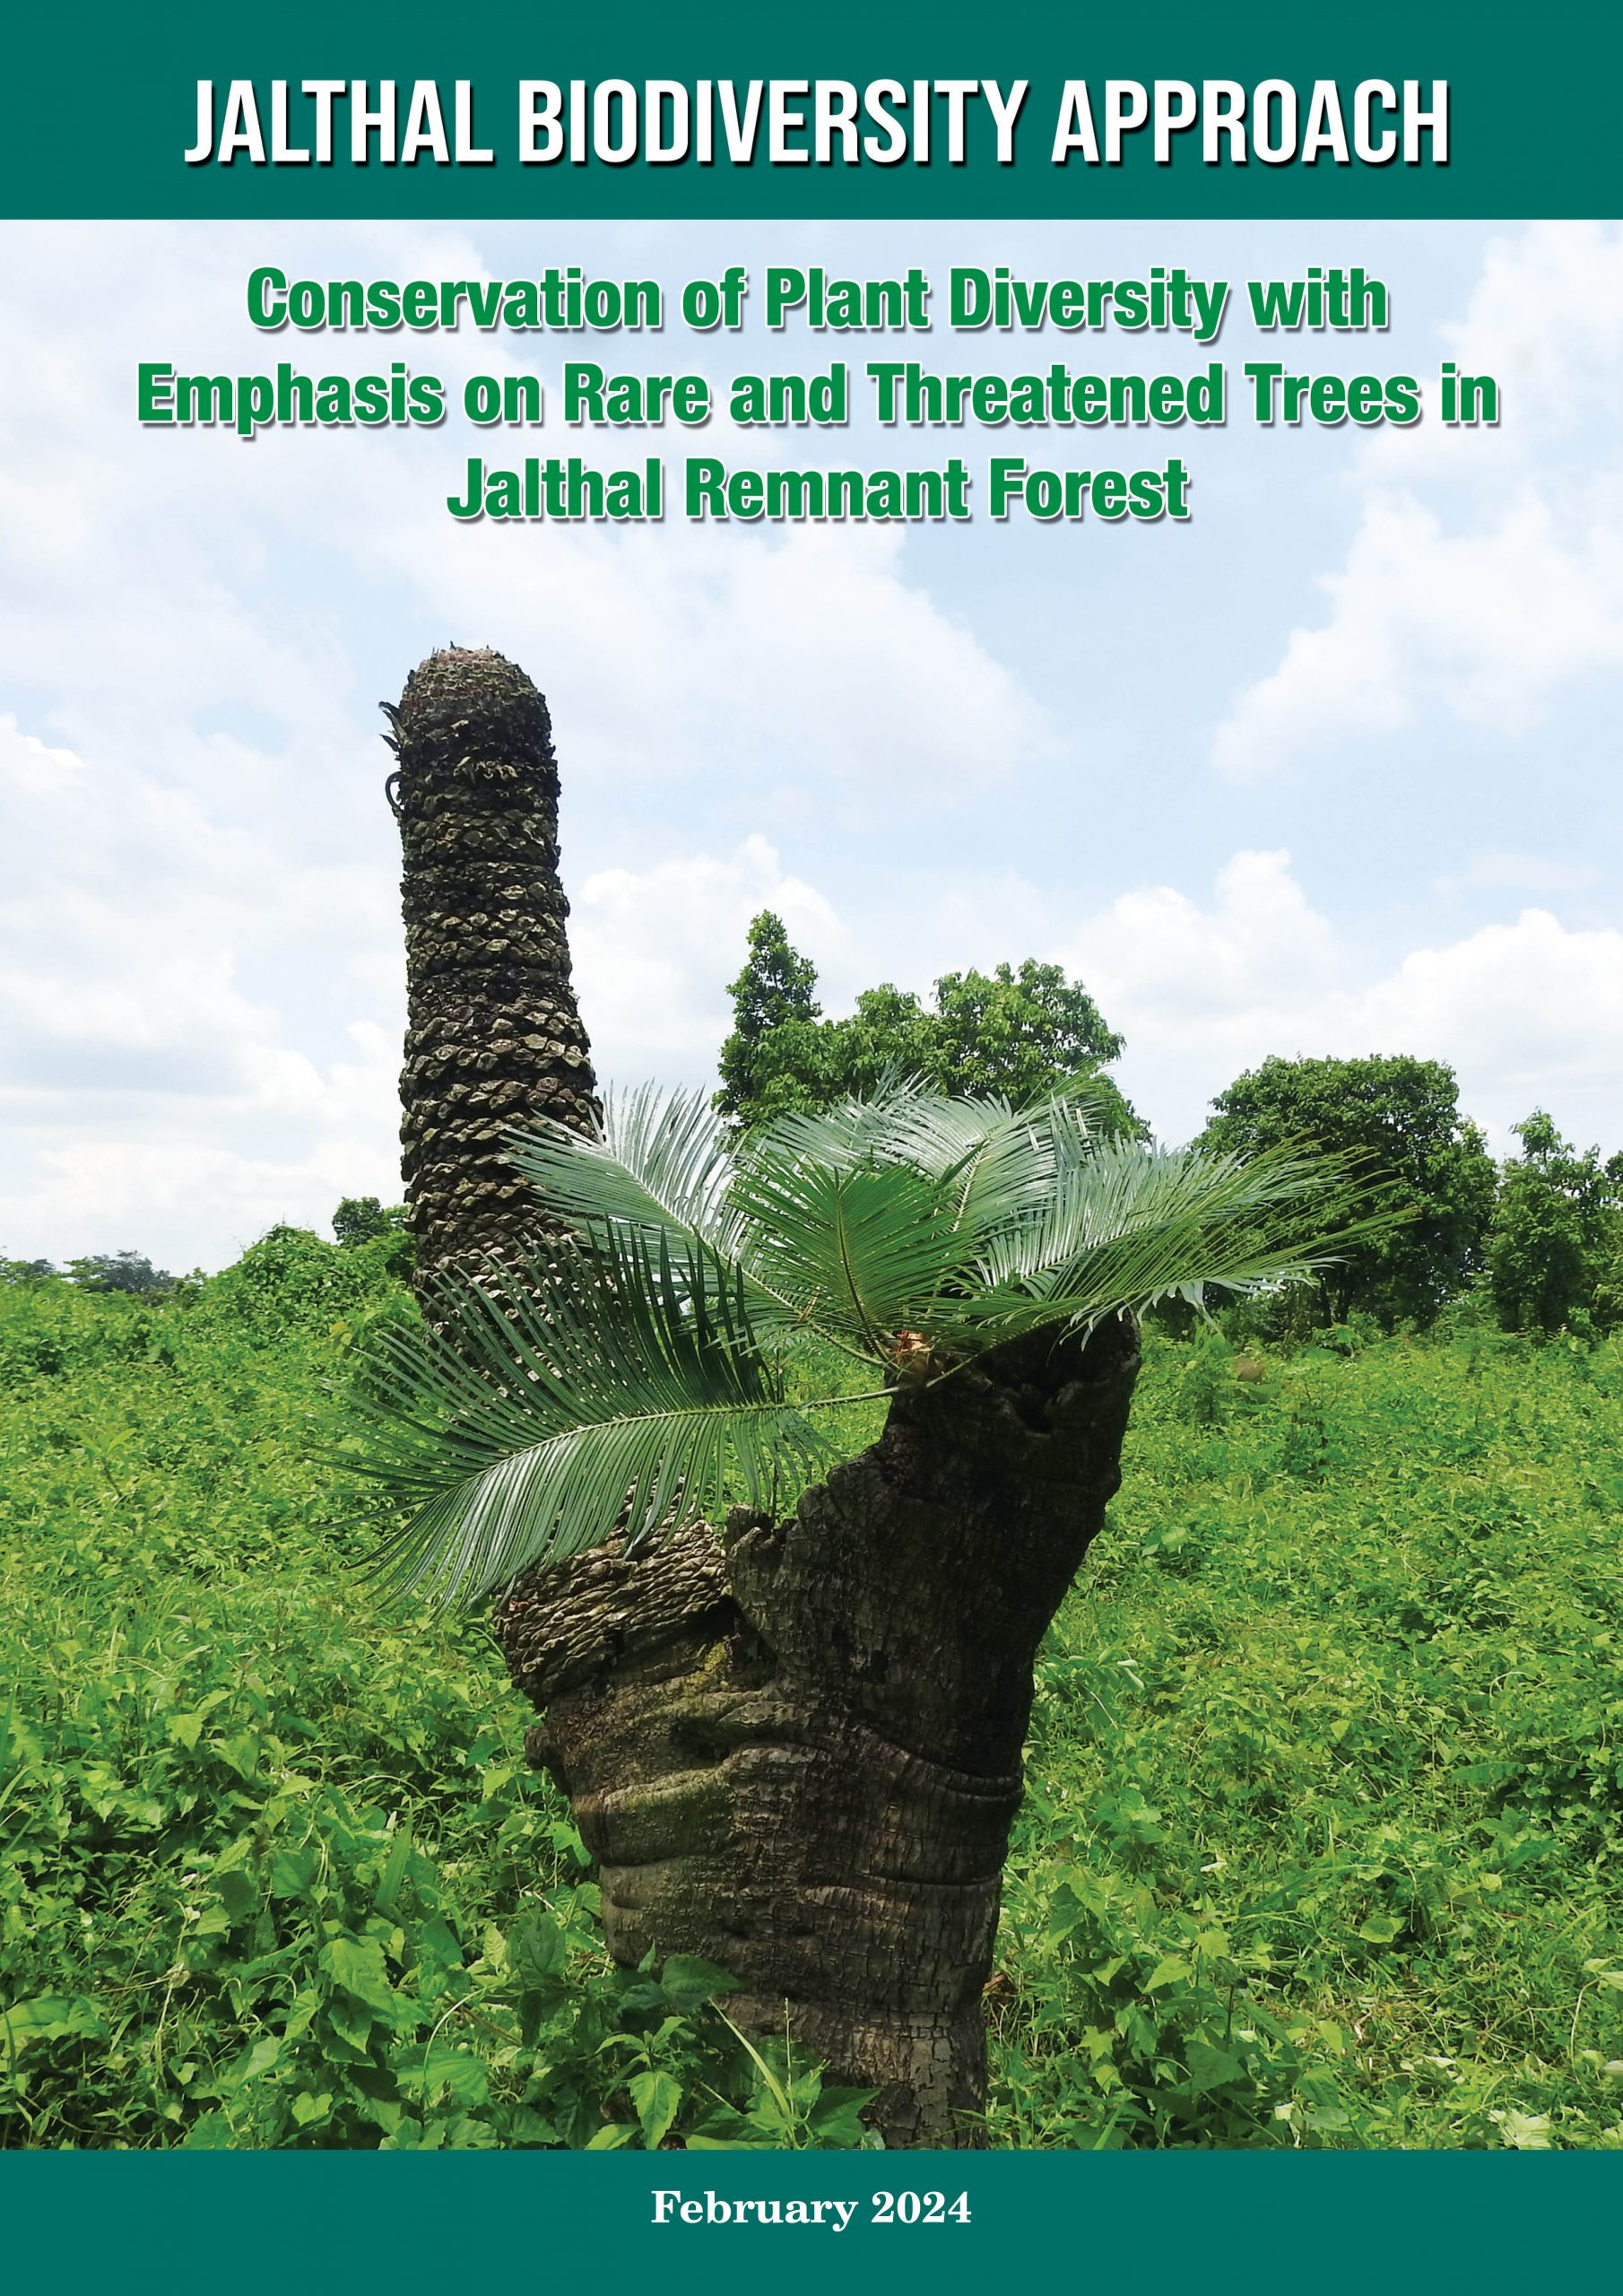 Conservation of Plant Diversity with Emphasis on Rare and Threatened Trees in Jalthal Remnant Forest